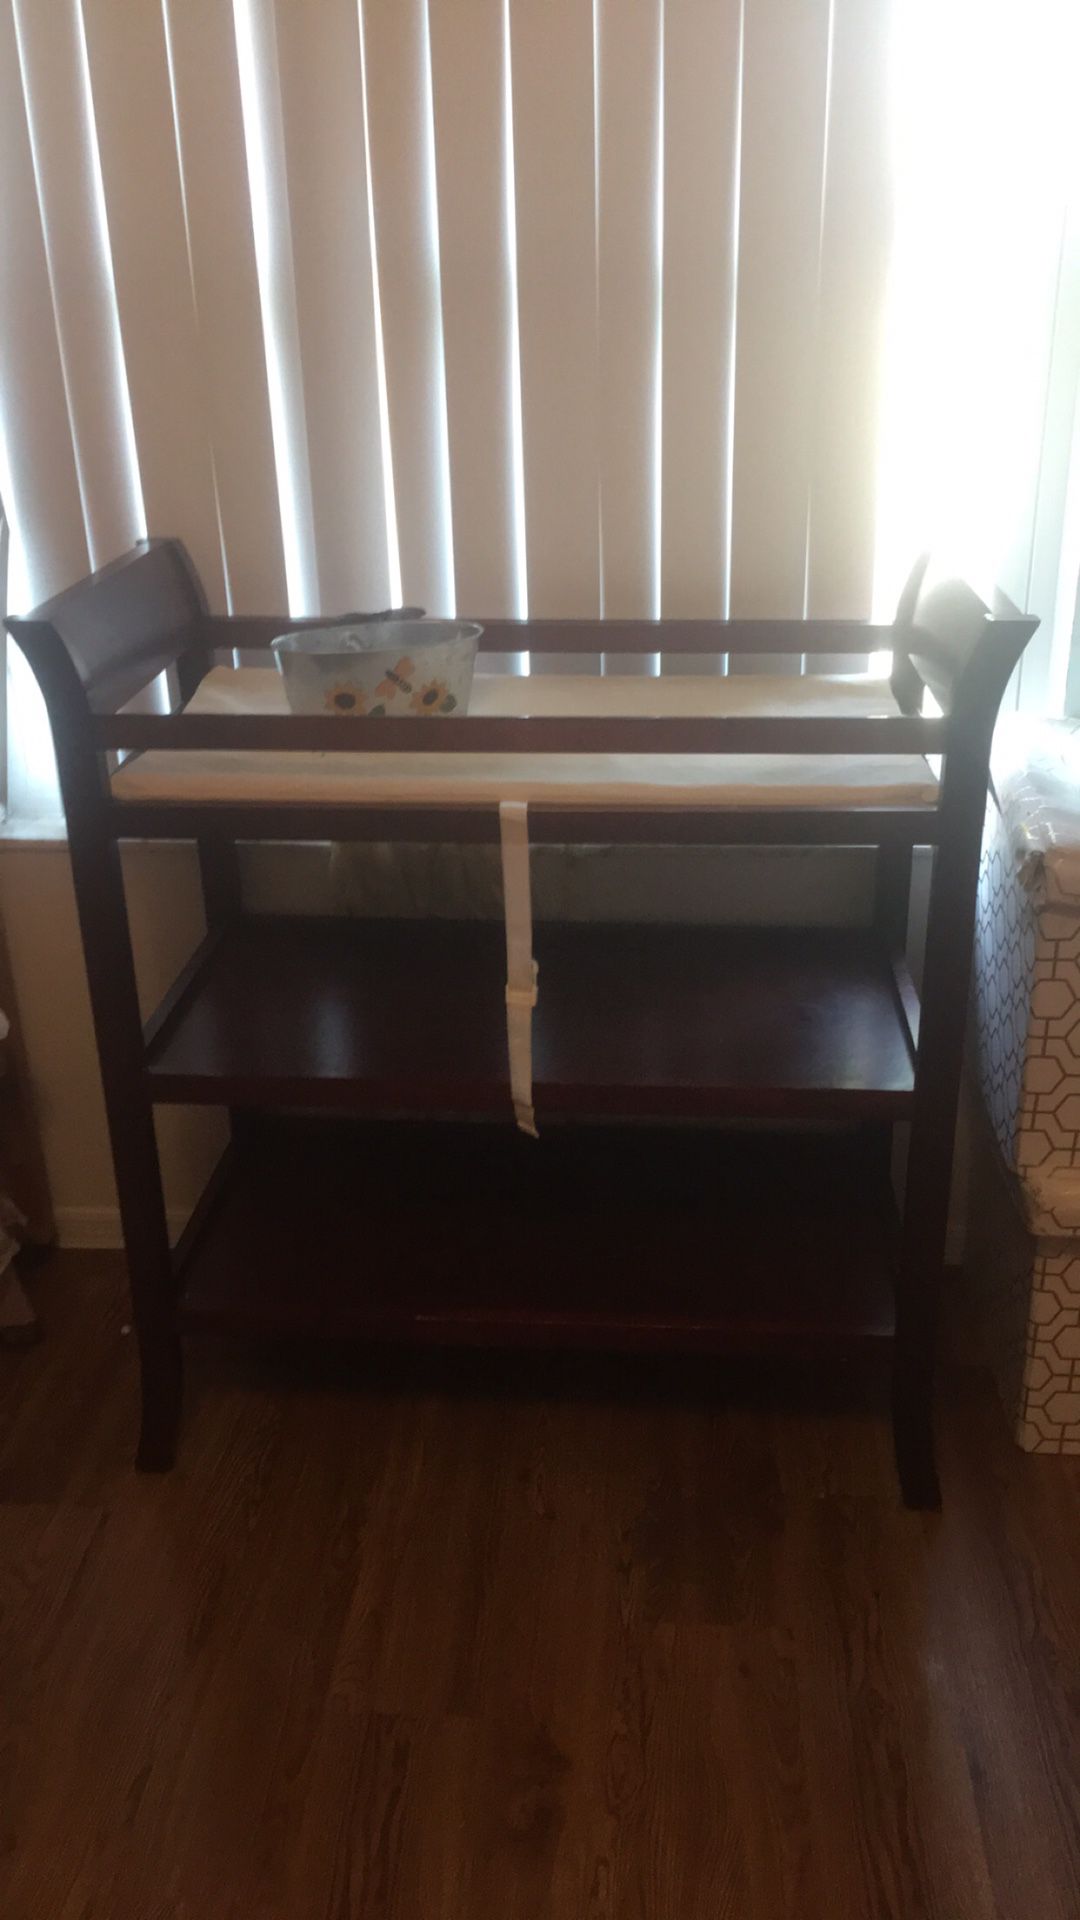 Wooden changing table